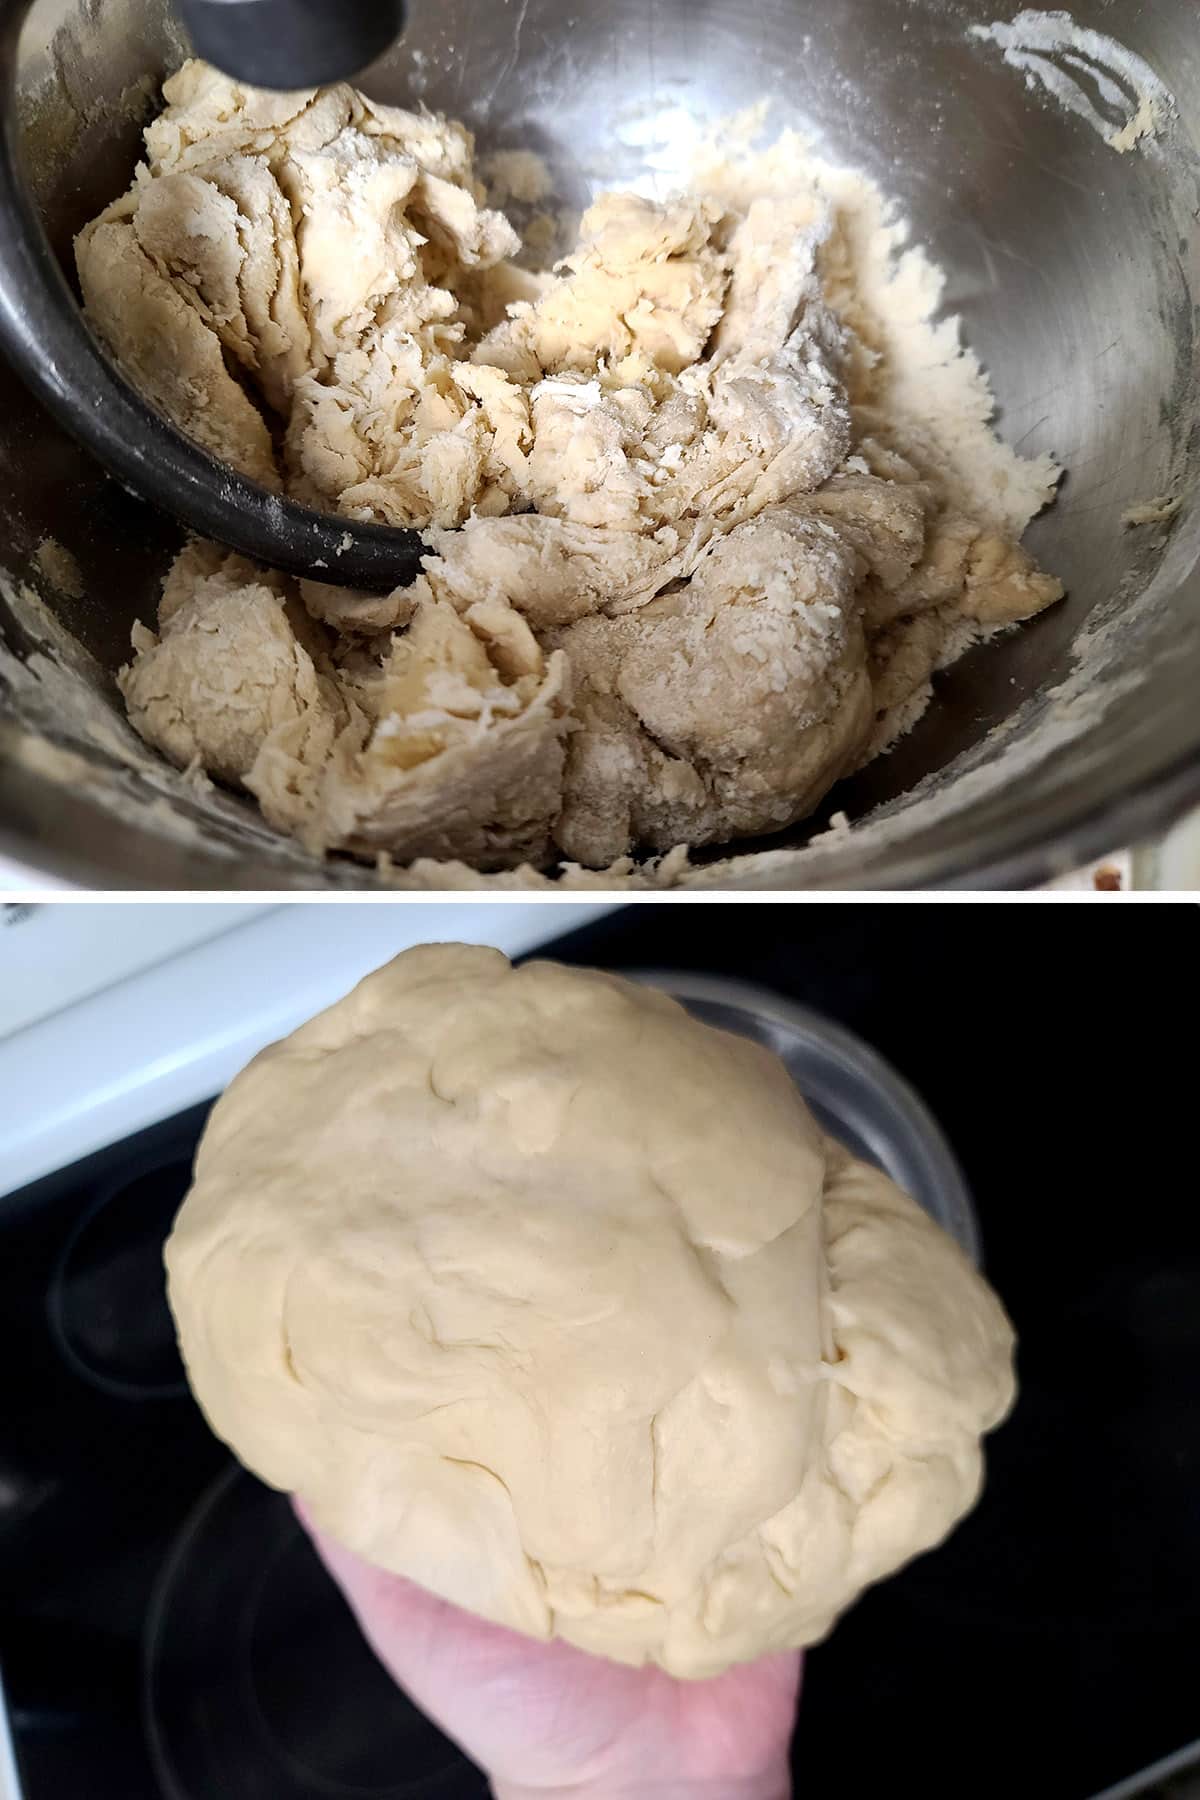 A 2 part image showing the dough before and after being kneaded smooth.